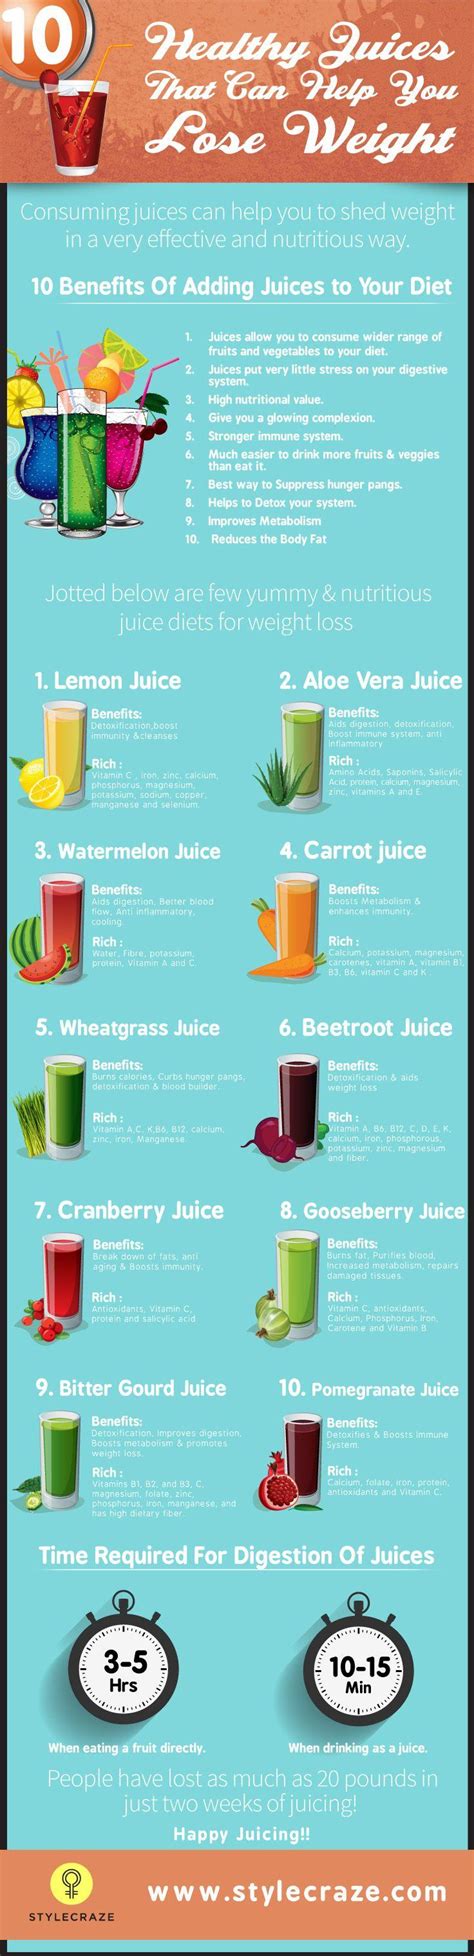 20 Healthy Juices That Can Help You Lose Weight 2577129 Weddbook